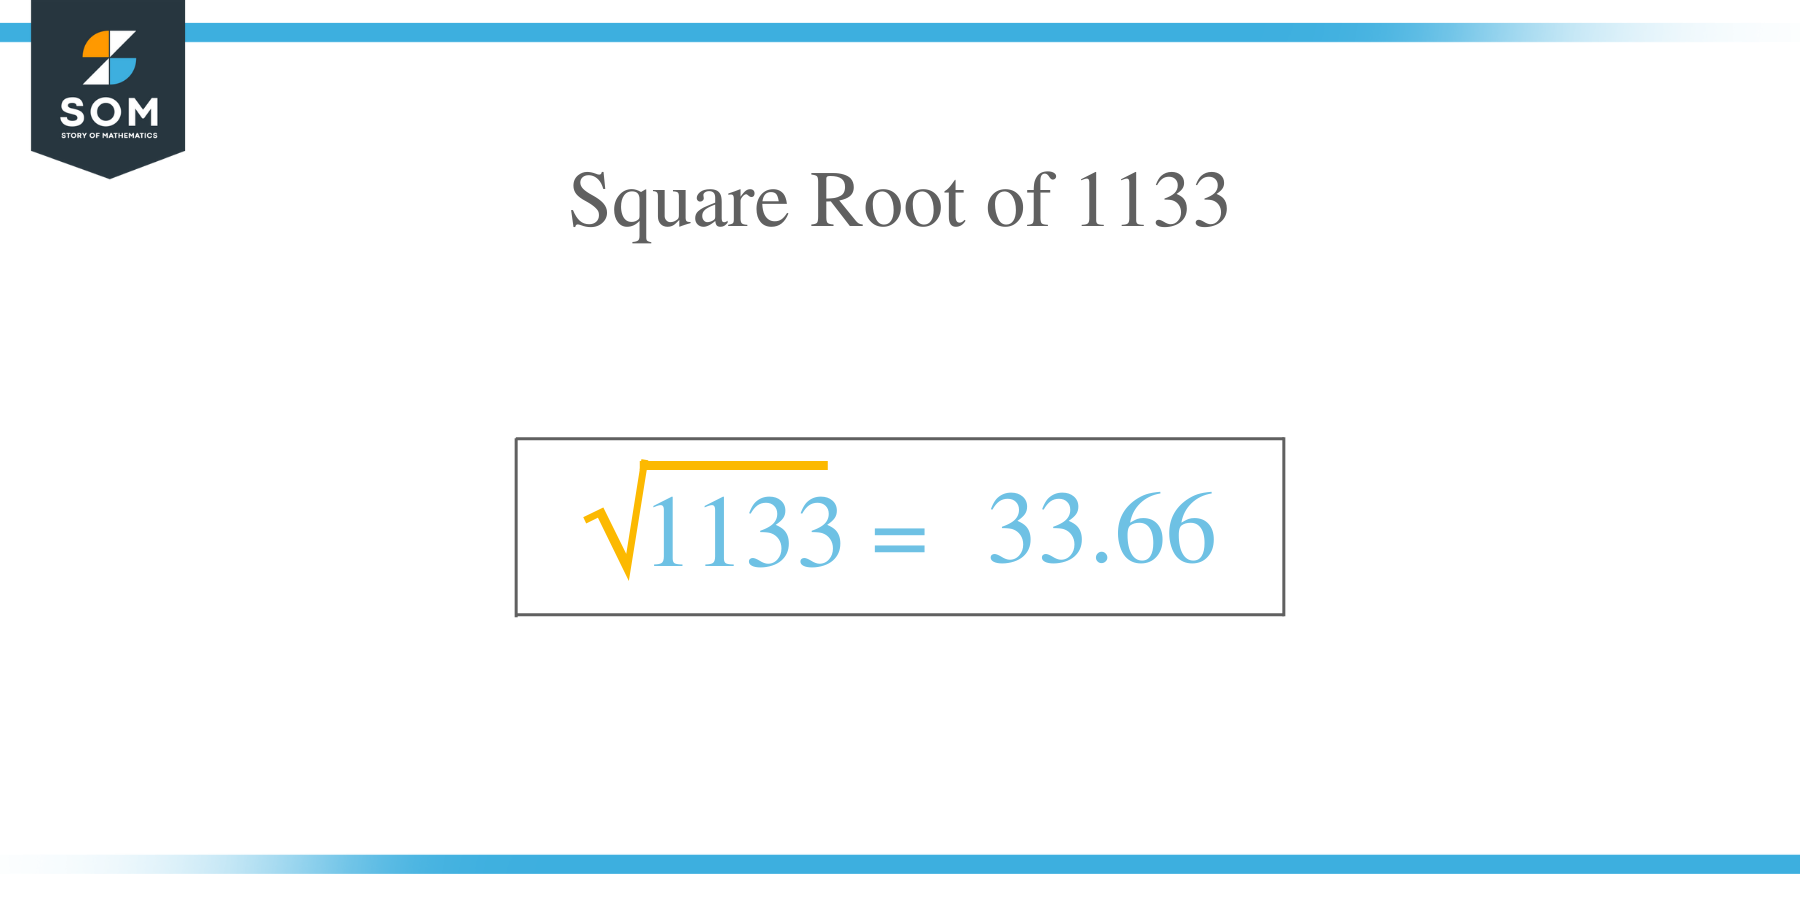 Square Root of 1133